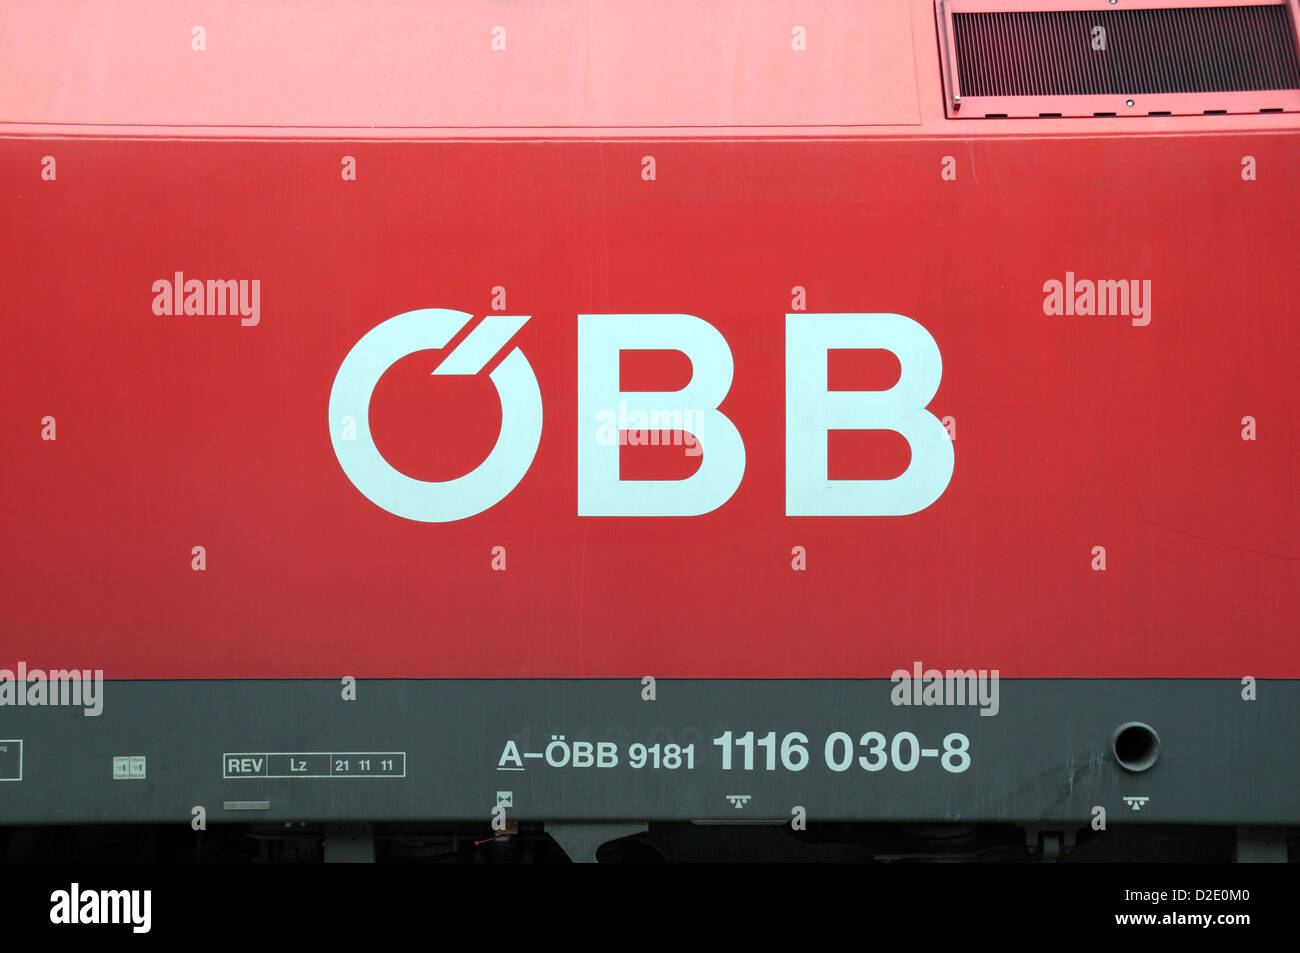 OBB, the logo of the Austrian Federal Railways, on the side of a train in Vienna, Austria. Stock Photo